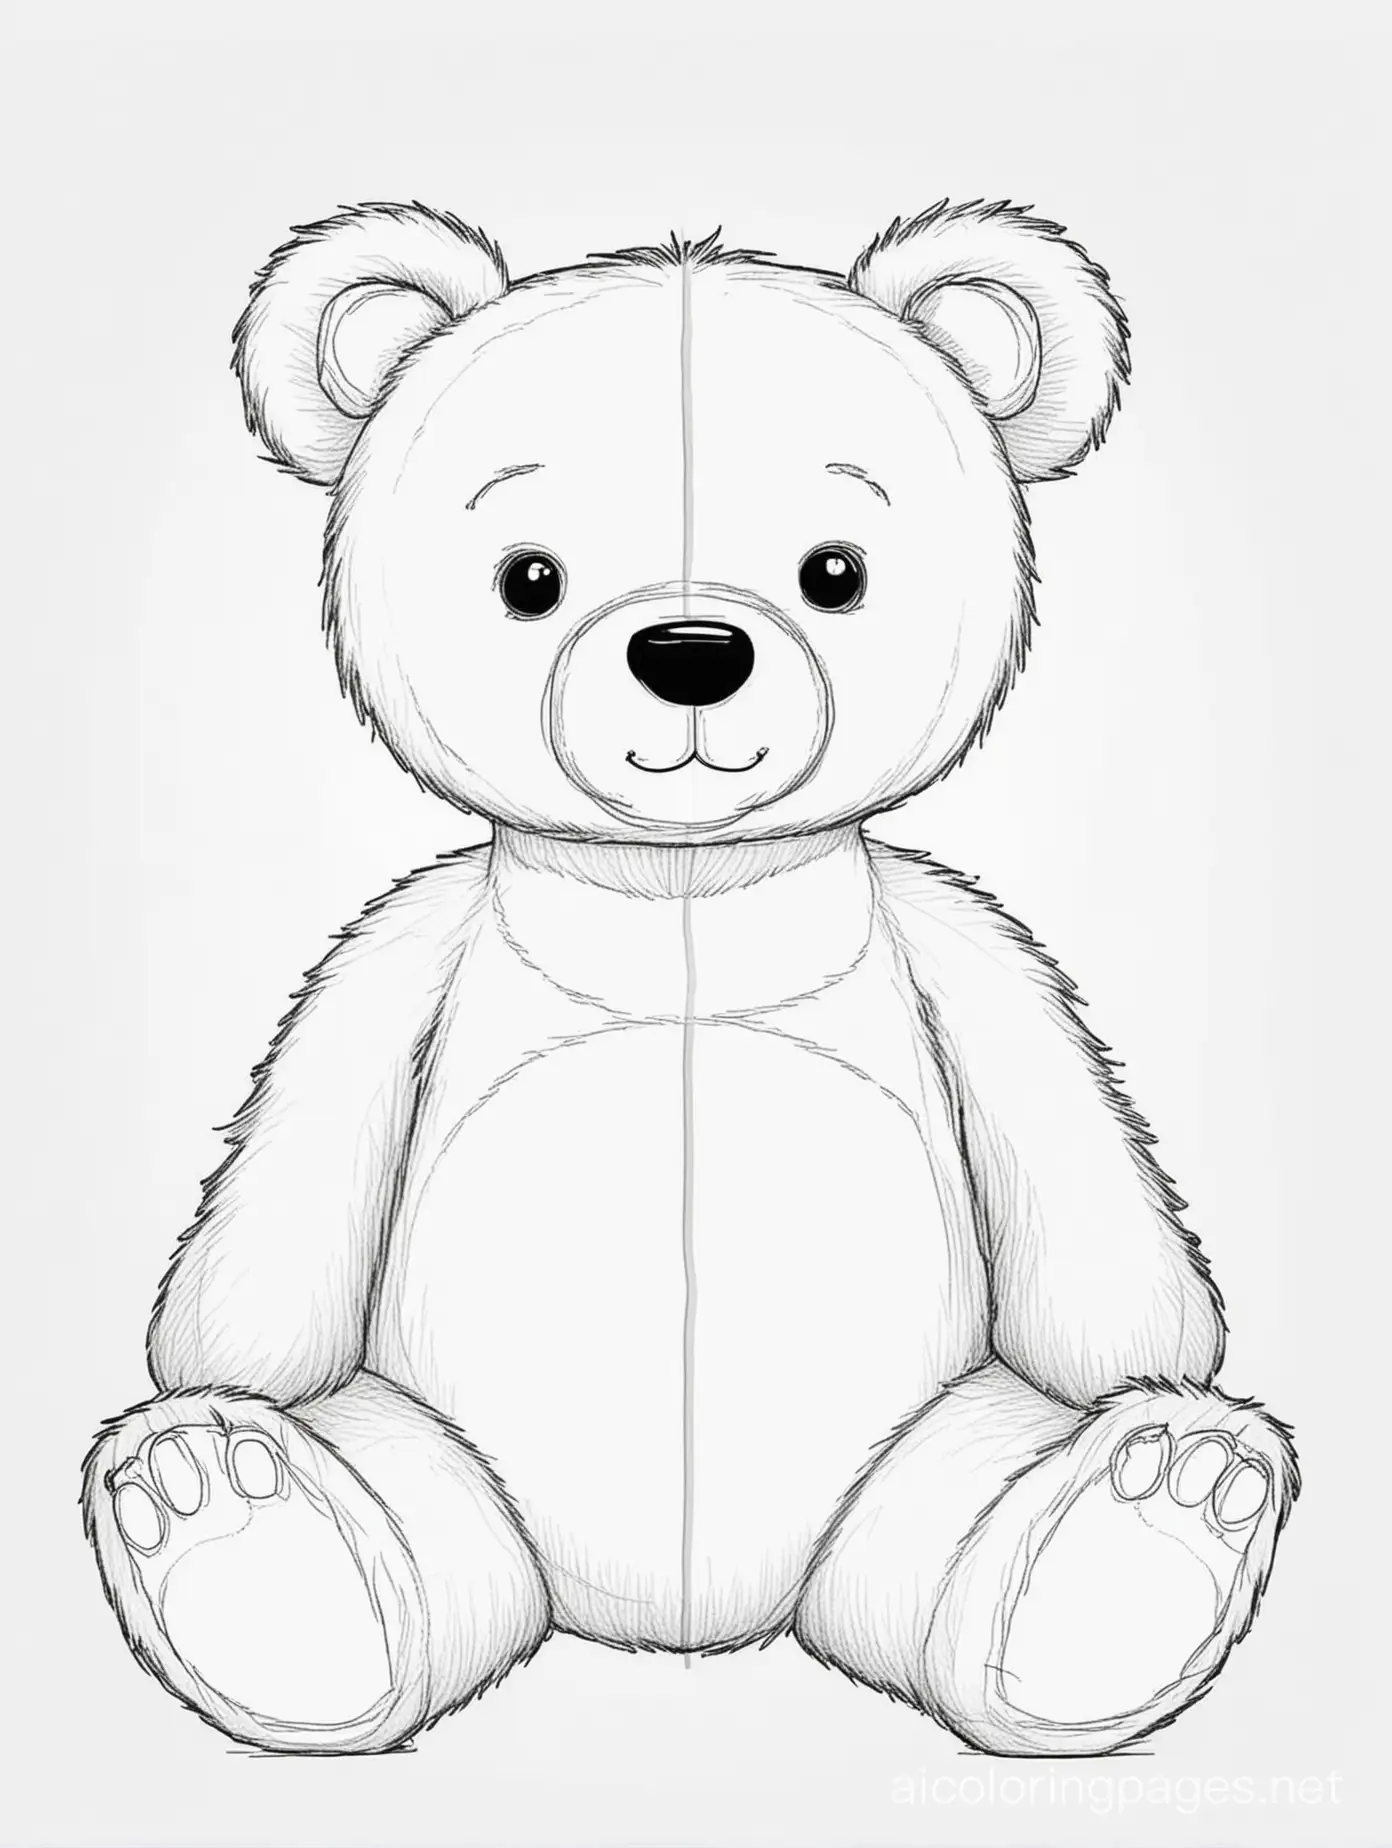 Teddy bear sitting position Teddy bear standing 
position 

, Coloring Page, black and white, line art, white background, Simplicity, Ample White Space. The background of the coloring page is plain white to make it easy for young children to color within the lines. The outlines of all the subjects are easy to distinguish, making it simple for kids to color without too much difficulty